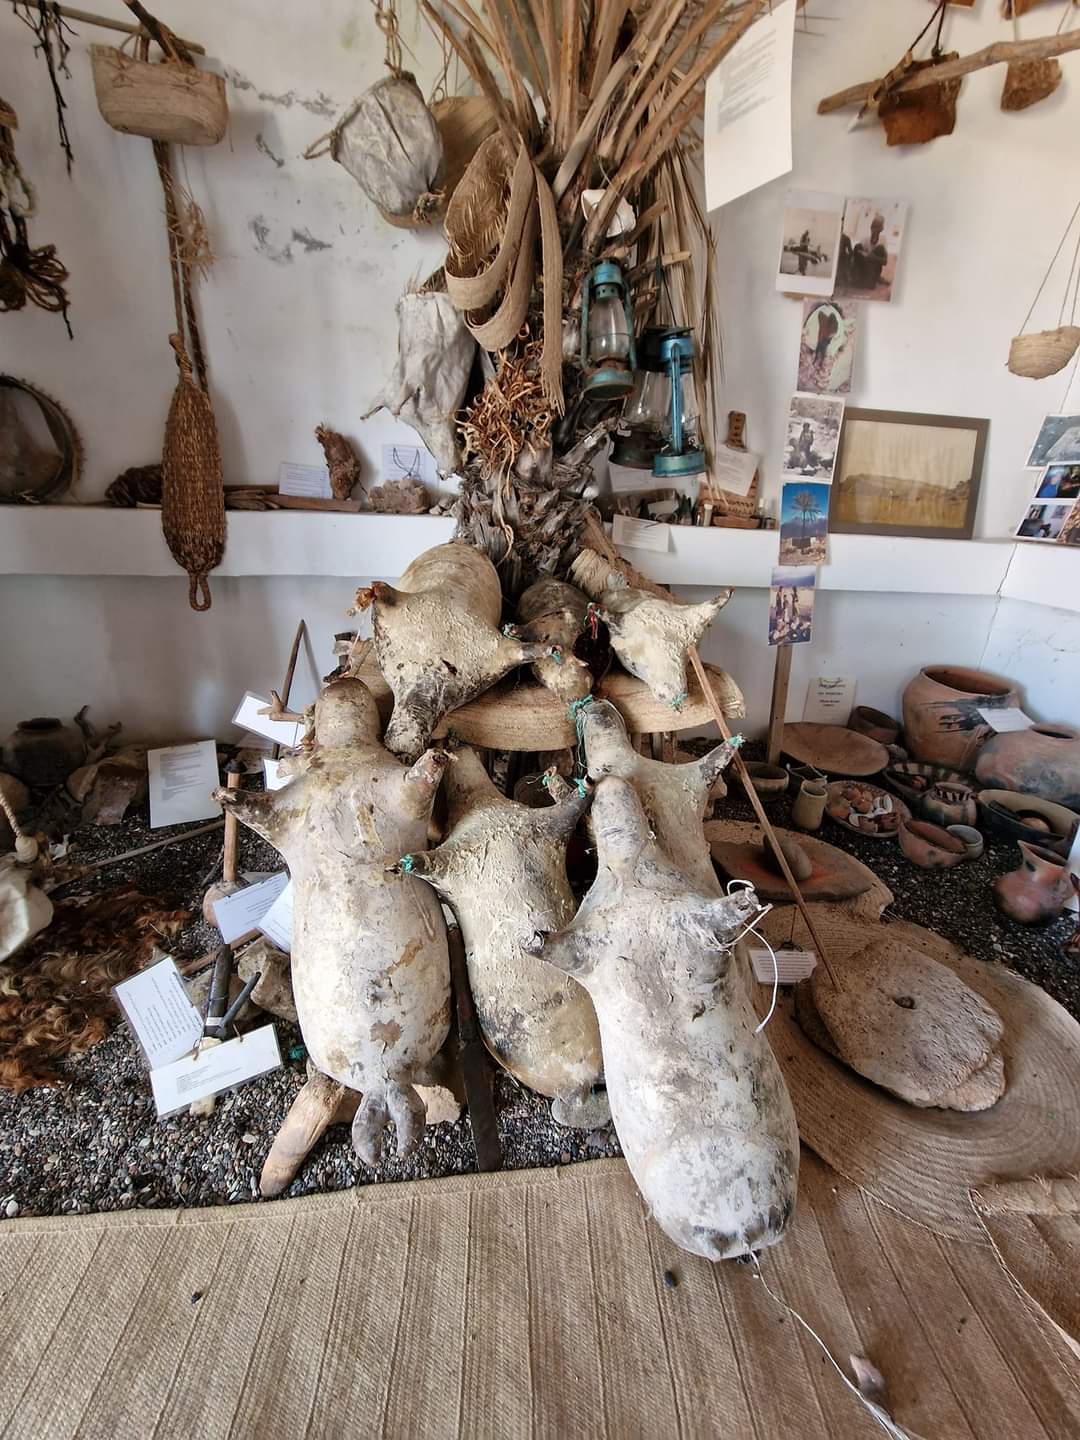 Local museum in Socotra